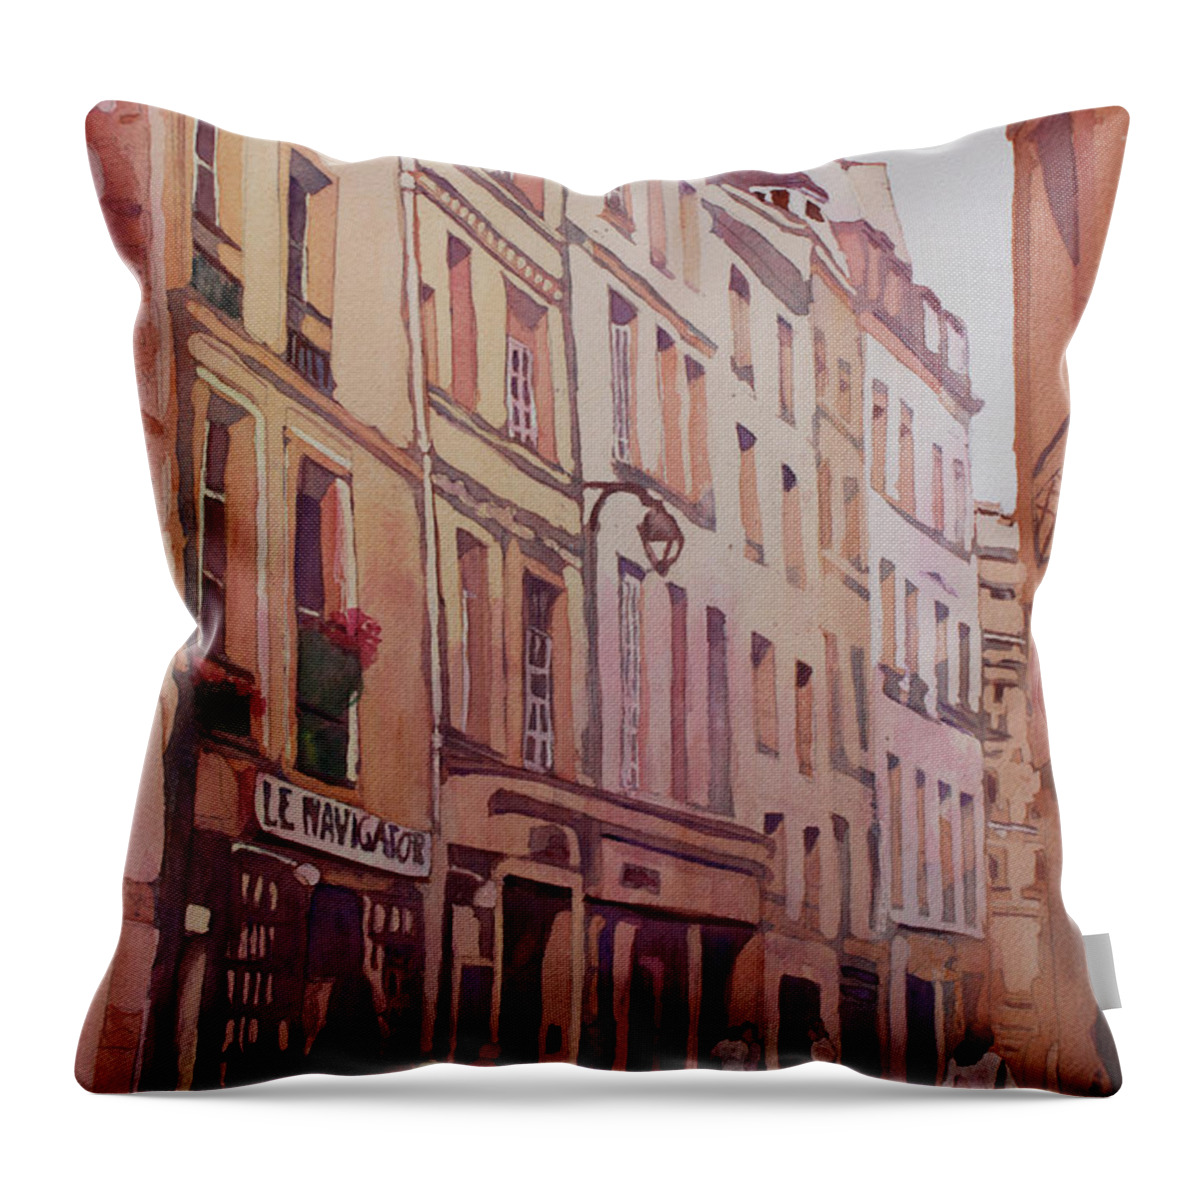 Rue Galande Throw Pillow featuring the painting Rue Galande by Jenny Armitage